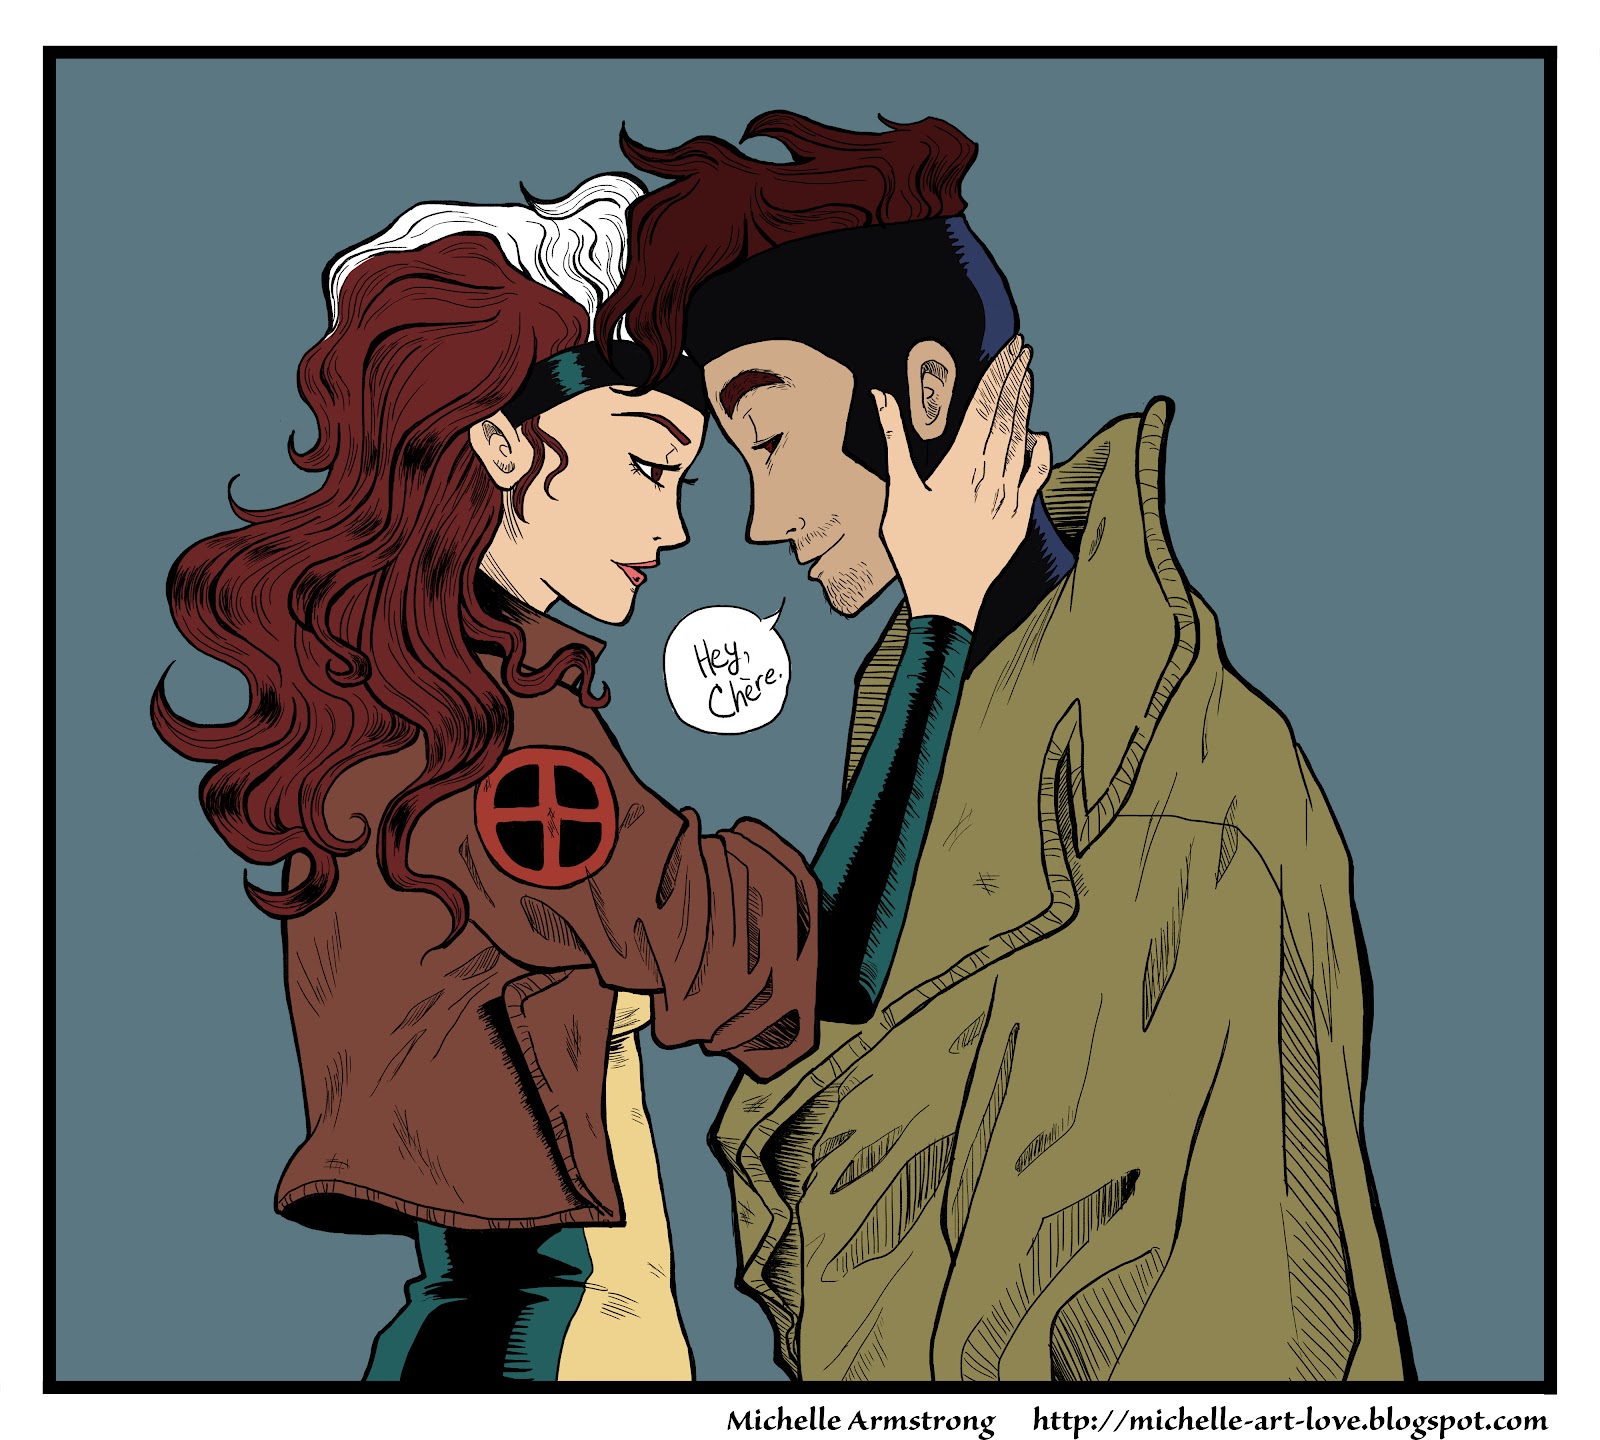 Decided to ink and color the drawing of Remy and Rogue I did the other day....